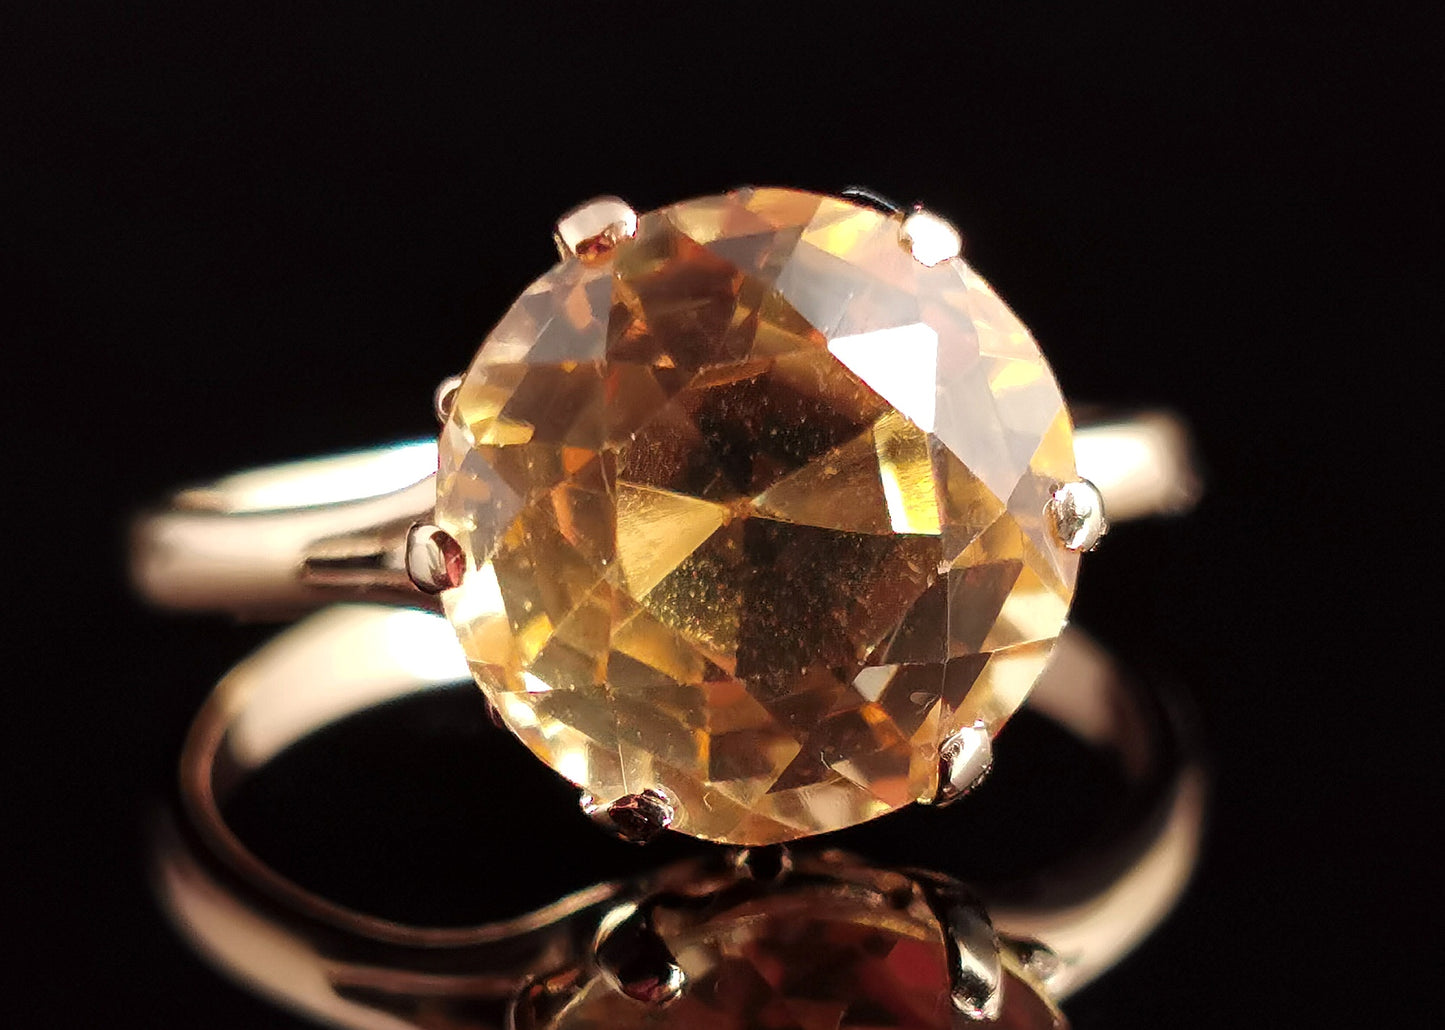 Vintage Citrine cocktail ring, 9ct yellow gold